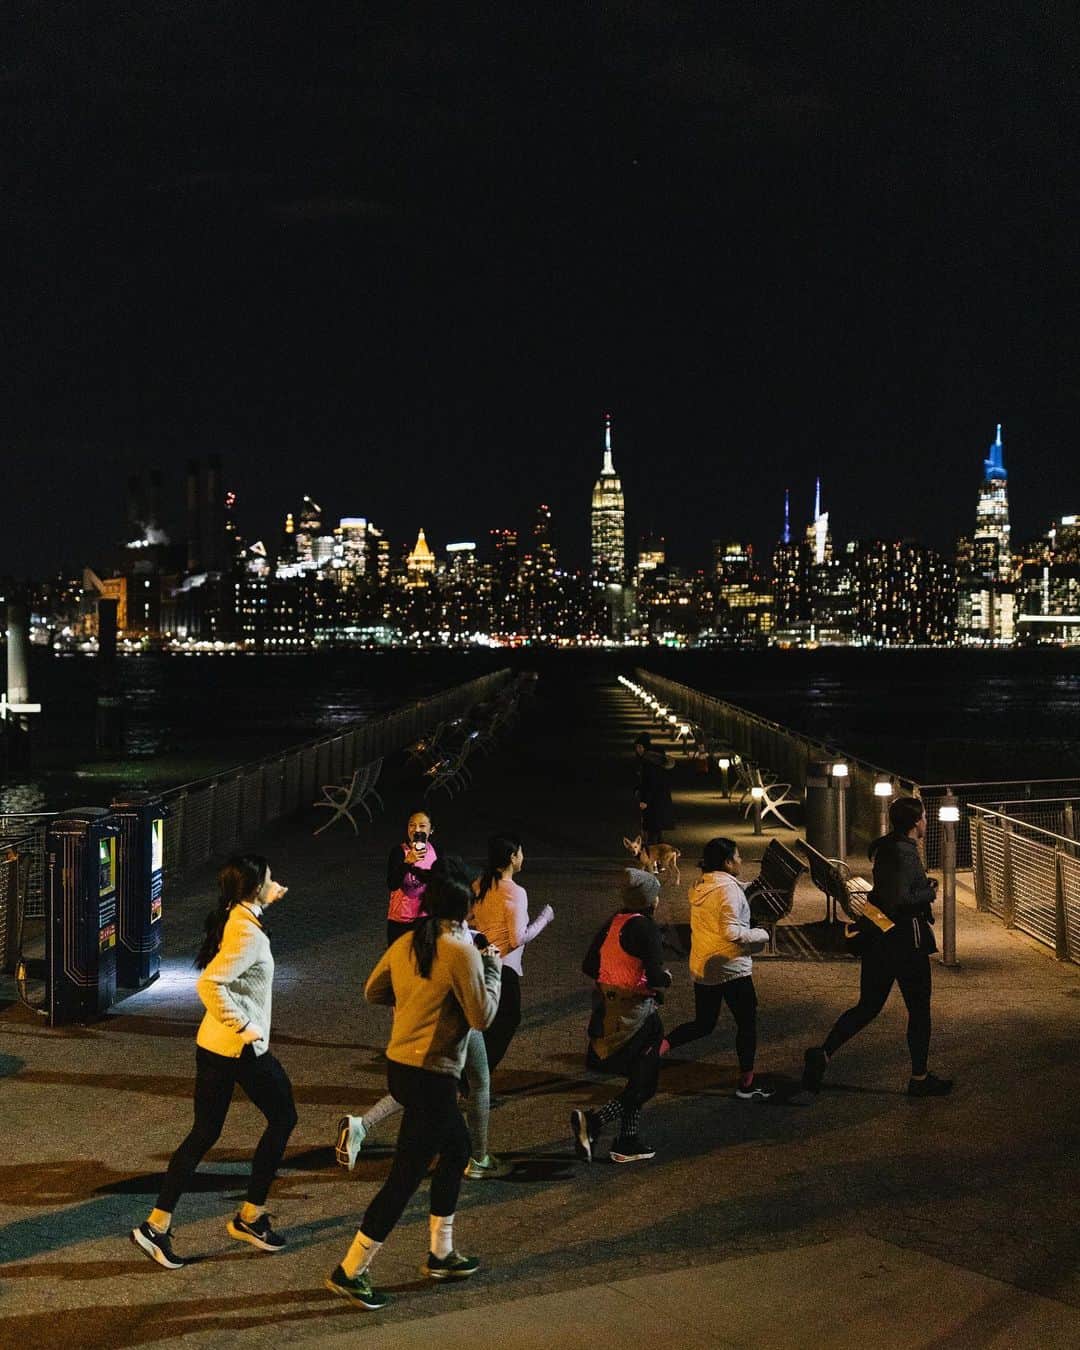 NikeNYCのインスタグラム：「To be a woman from New York City ❤️‍🔥 Last night we celebrated International Women’s Day with a community 5k run through Williamsburg.   And if you missed this run, don’t sweat 🤙 Come run with us weekly at Nike By UES and Nike By Williamsburg.」